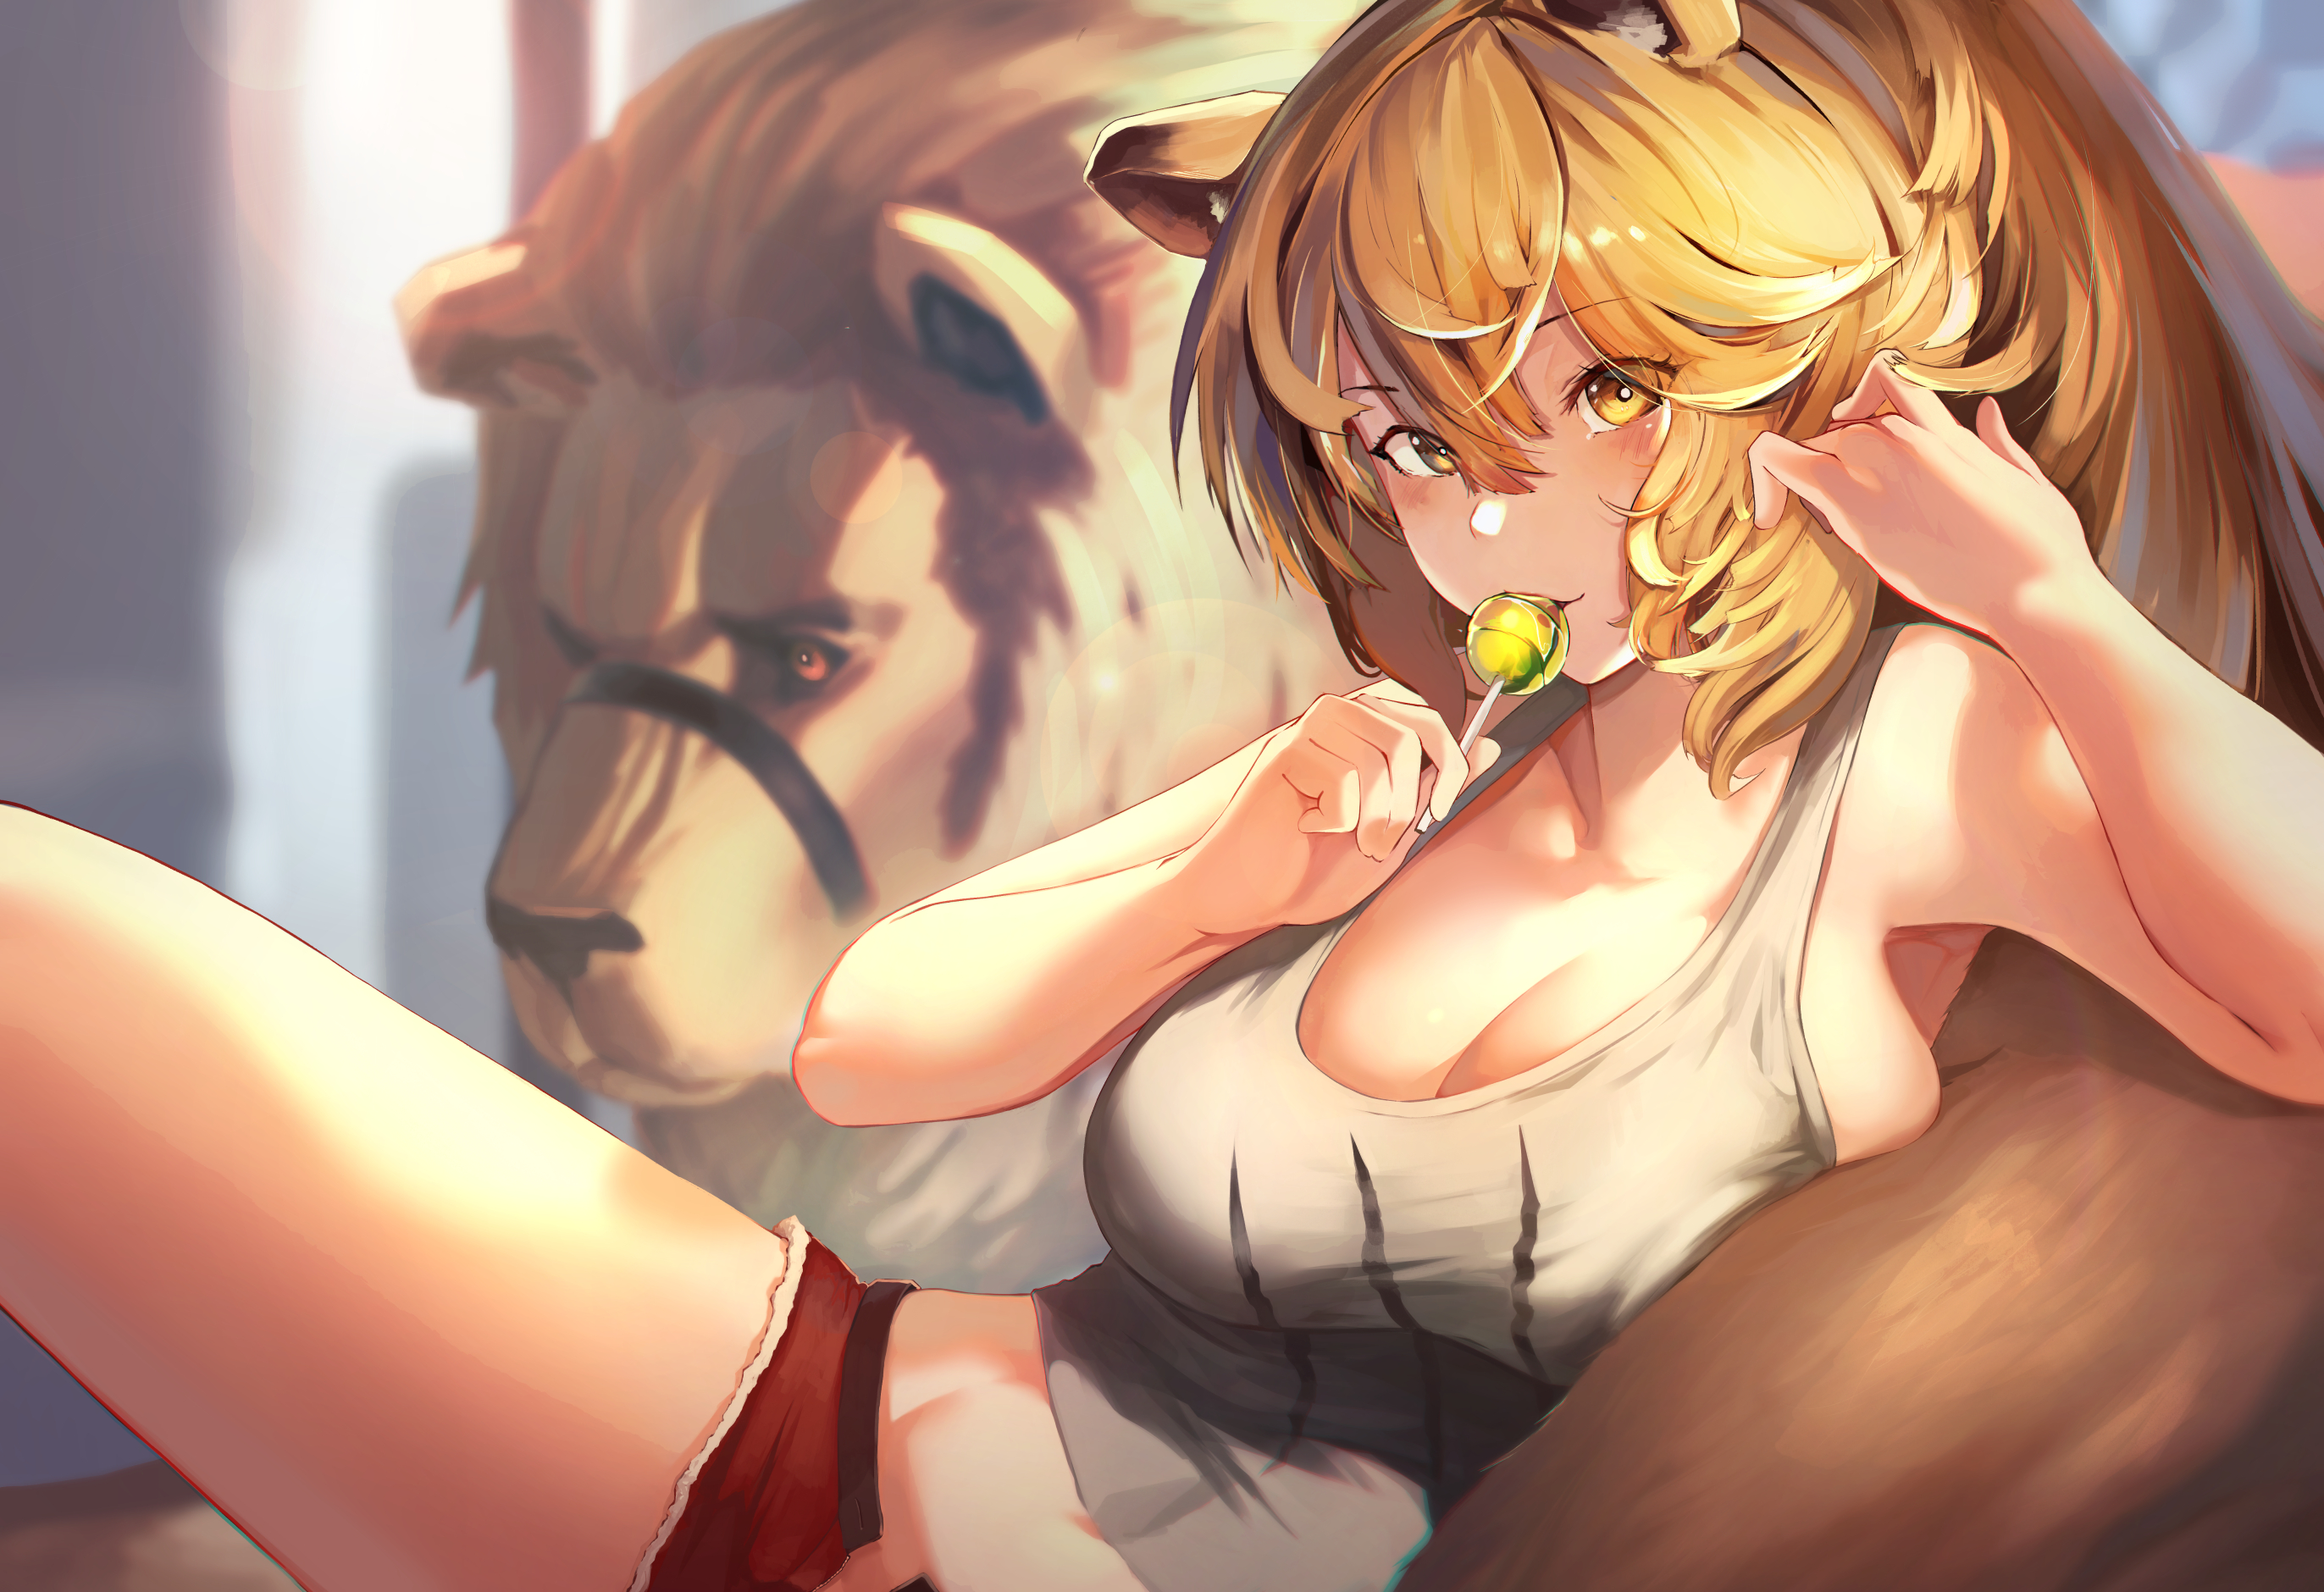 Anime 2744x1880 Siege(Arknights) animal ears blushing brown eyes candy cat girl cleavage lion long hair no bra shorts anime Arknights